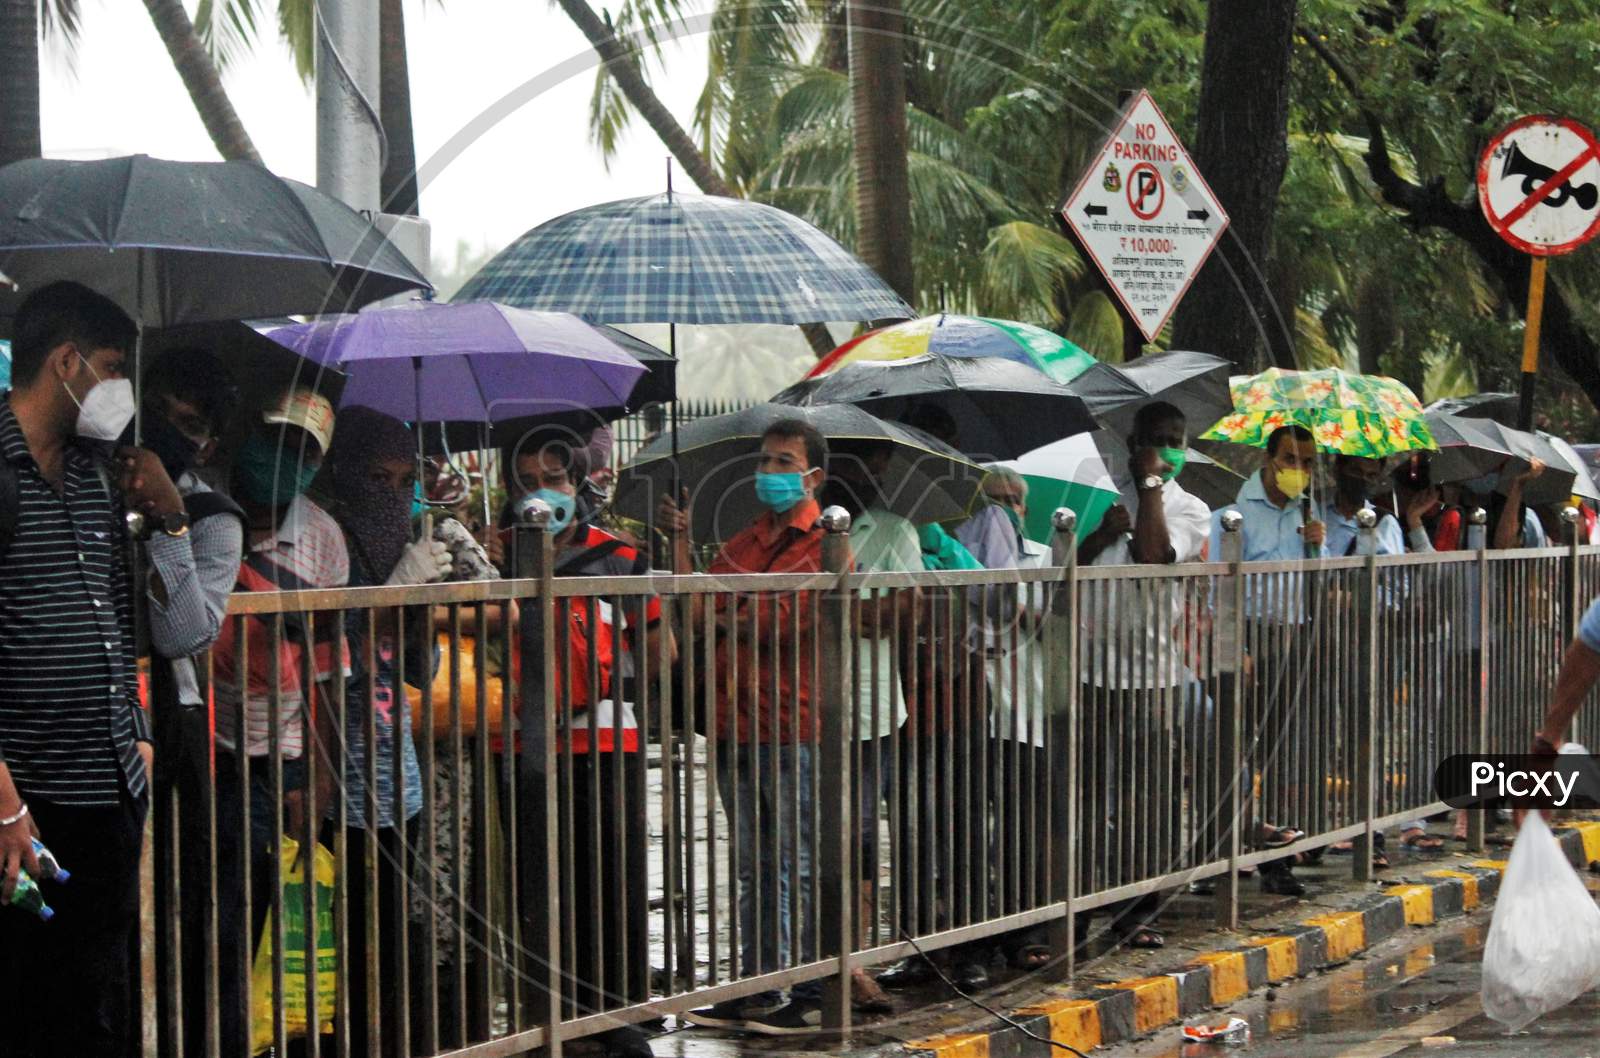 People wait to board a public bus during heavy rains, in Mumbai, India on July 4, 2020.